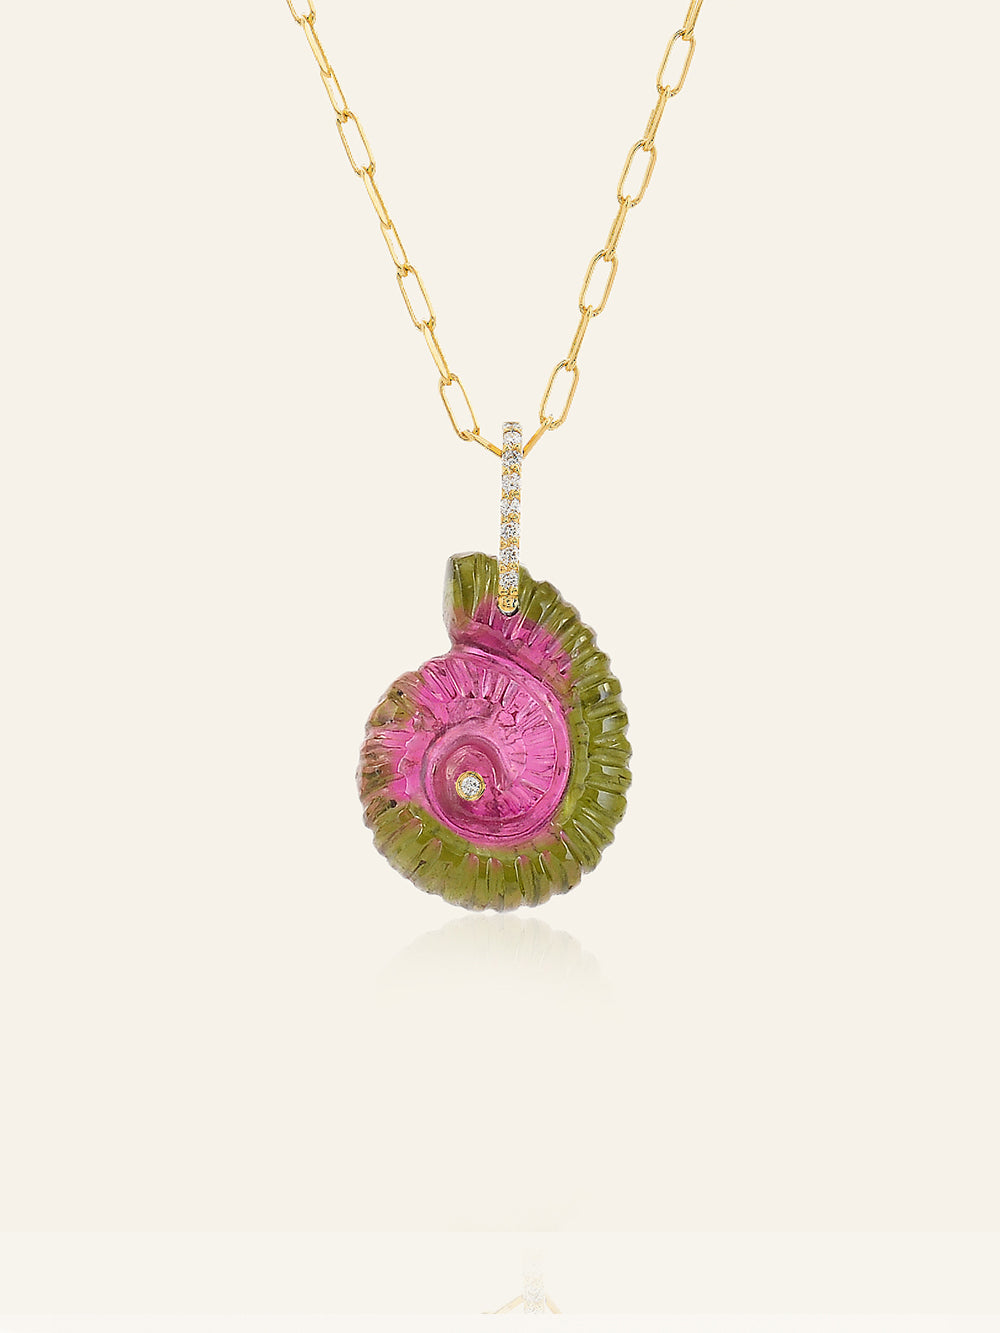 ESCARGOT PENDANT WITH DIAMOND IN THE MIDDLE